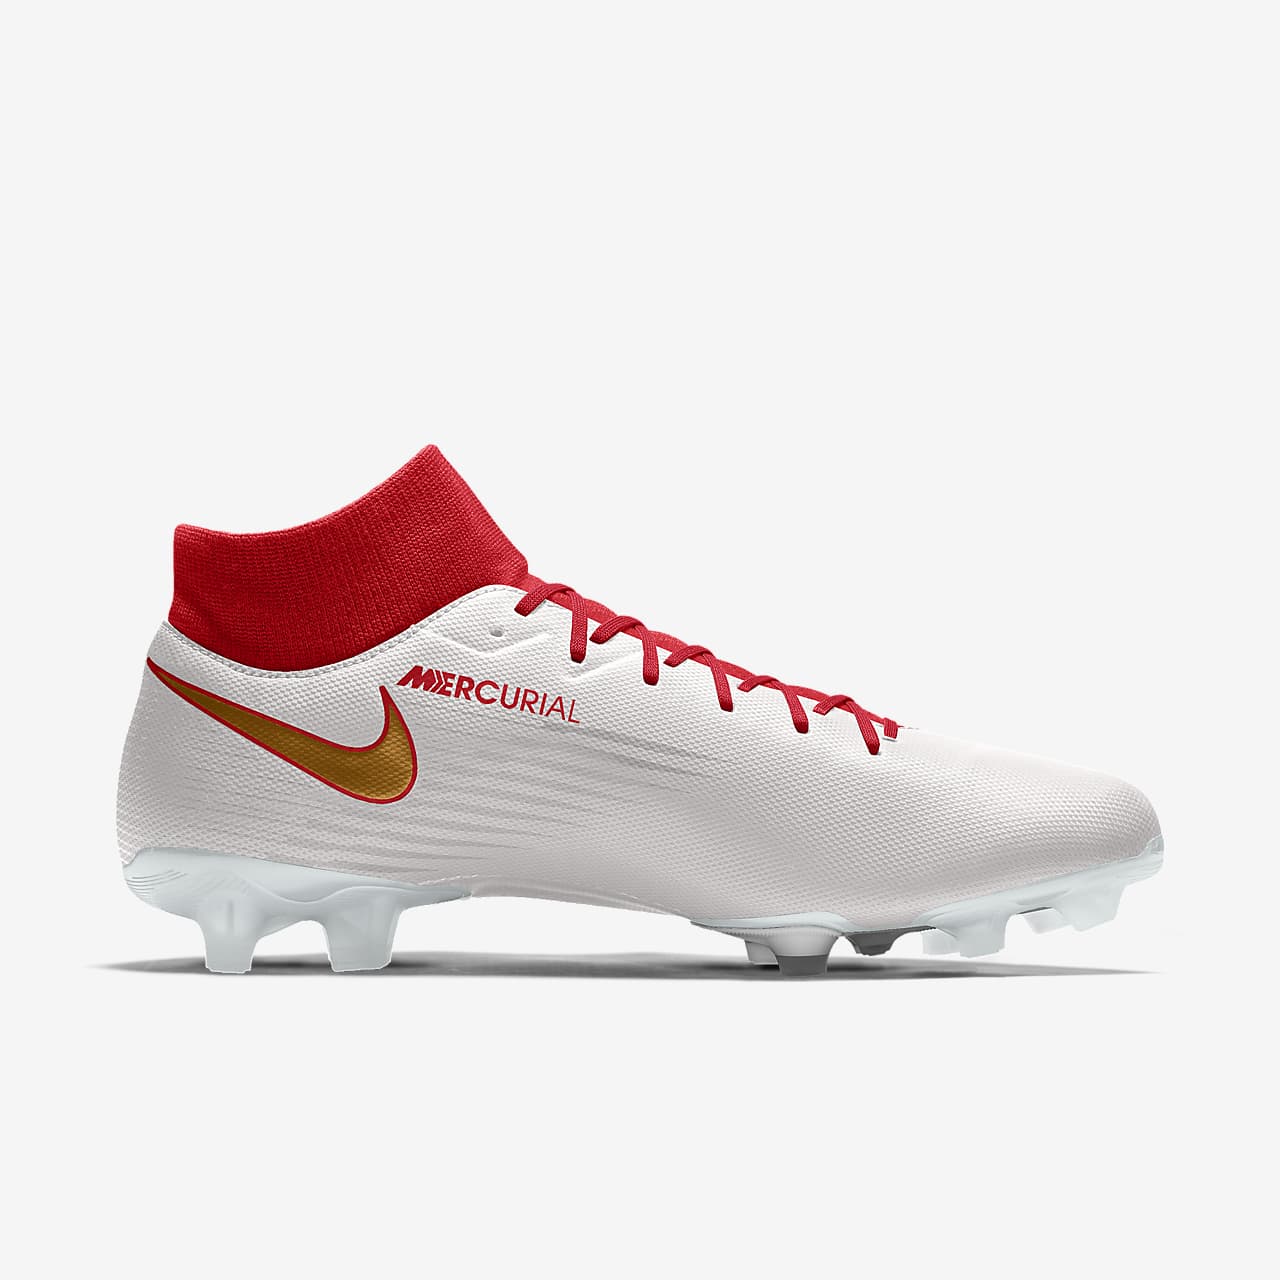 Nike Mercurial Superfly 7 Academy By 